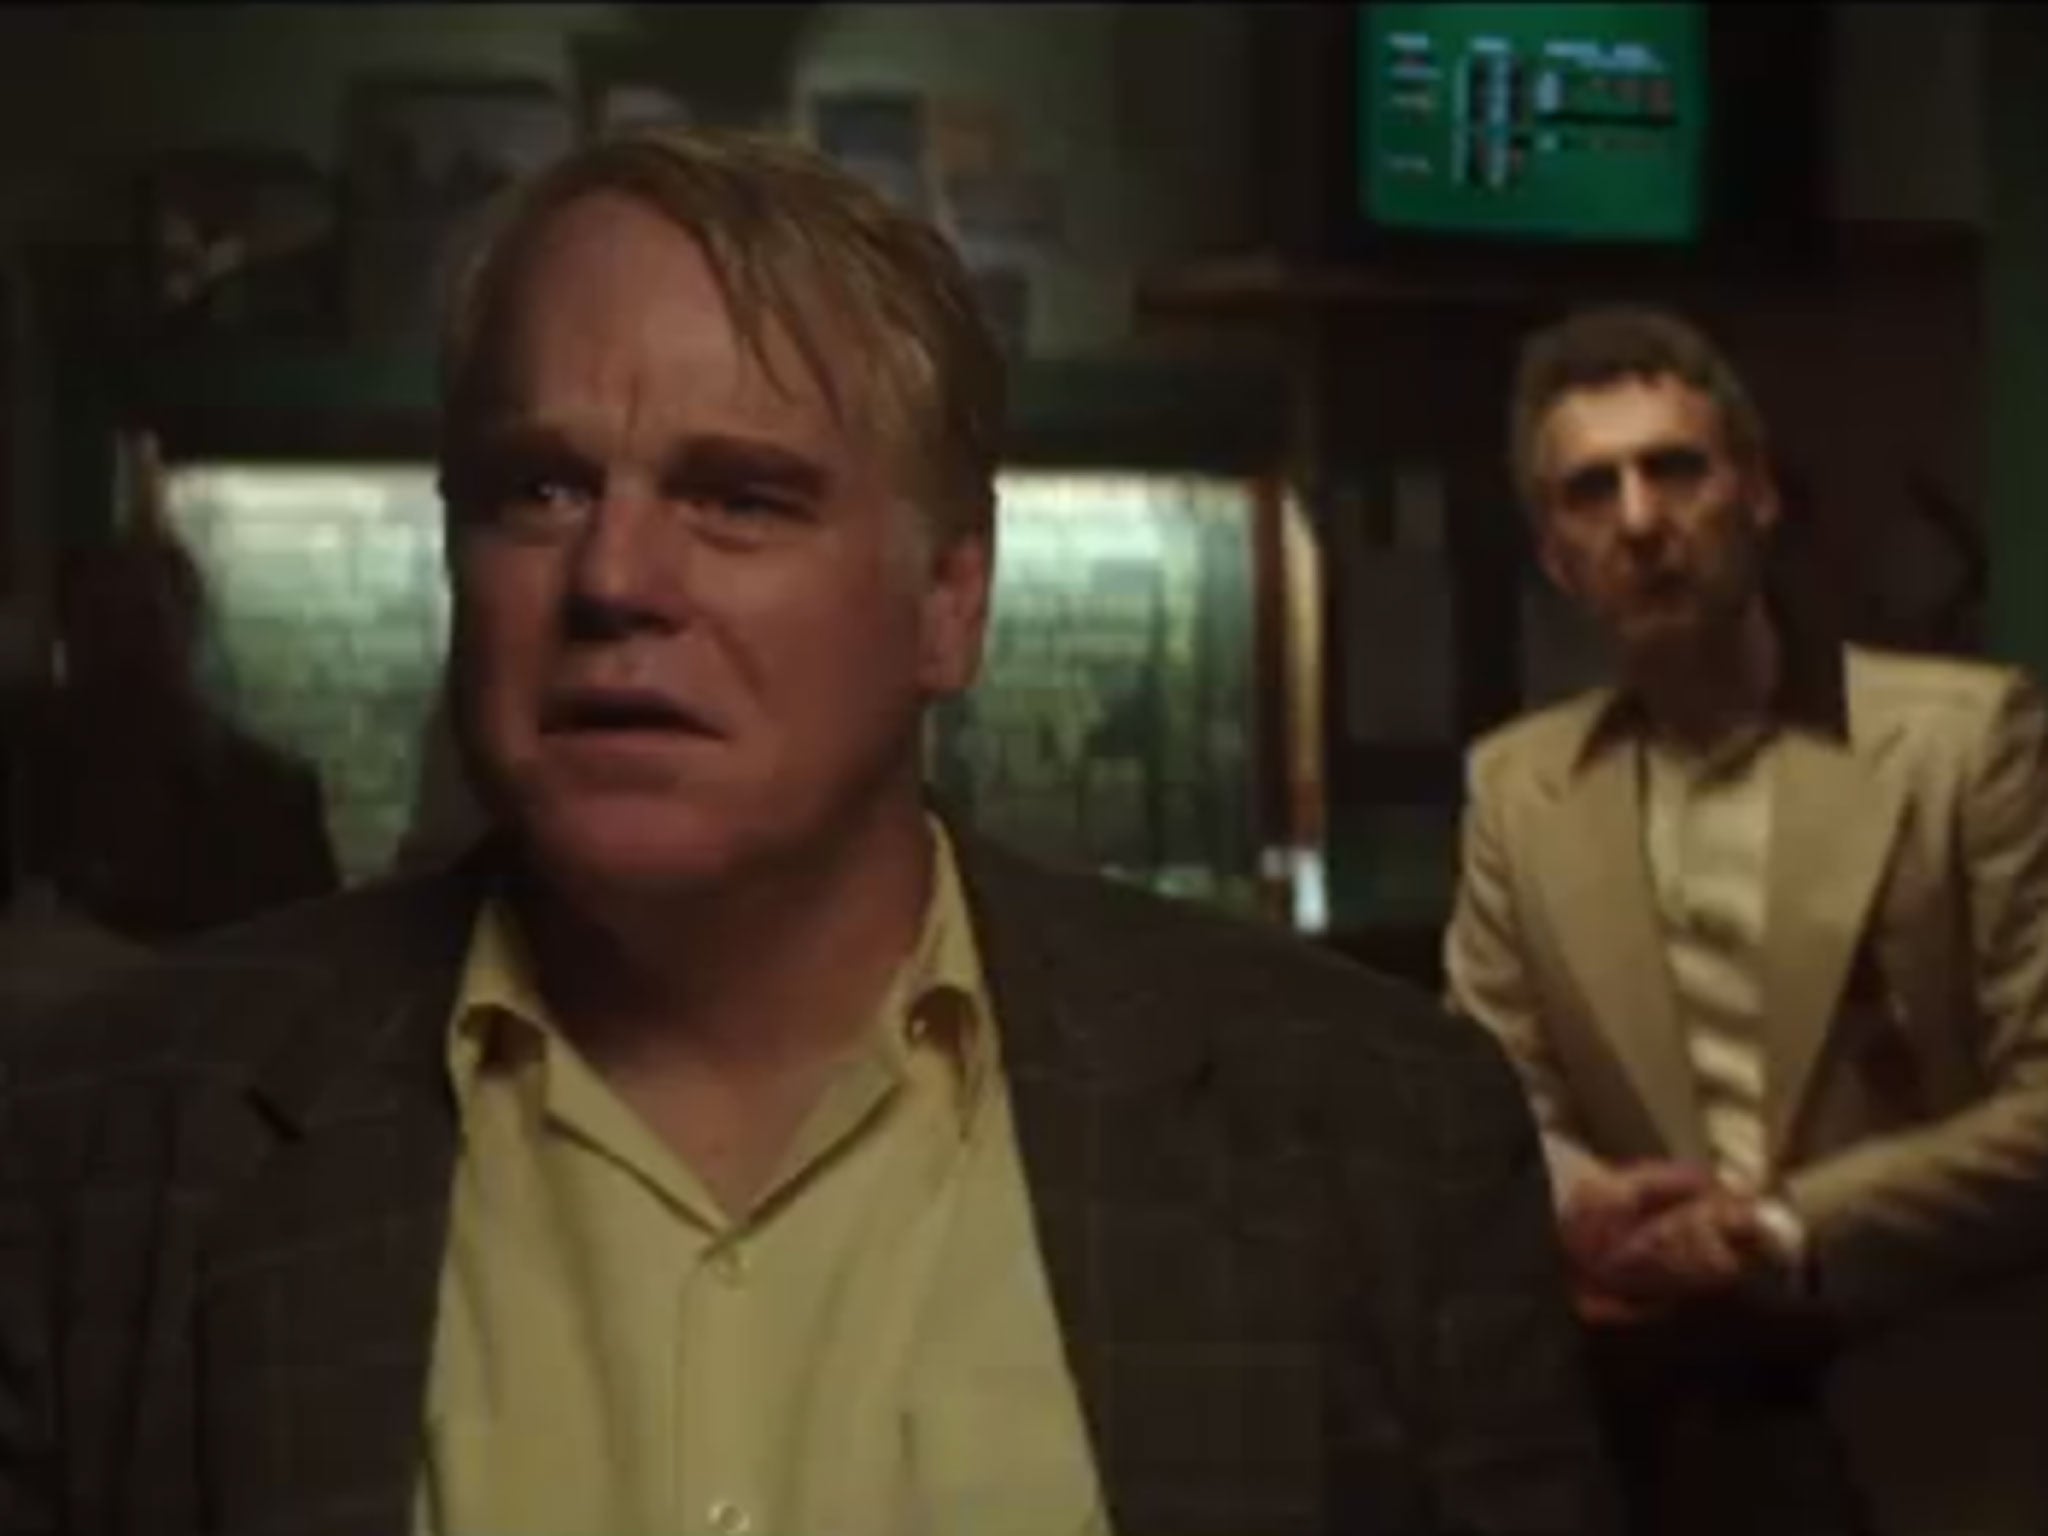 God S Pocket Trailer Watch Philip Seymour Hoffman In Final Role Before His Death The